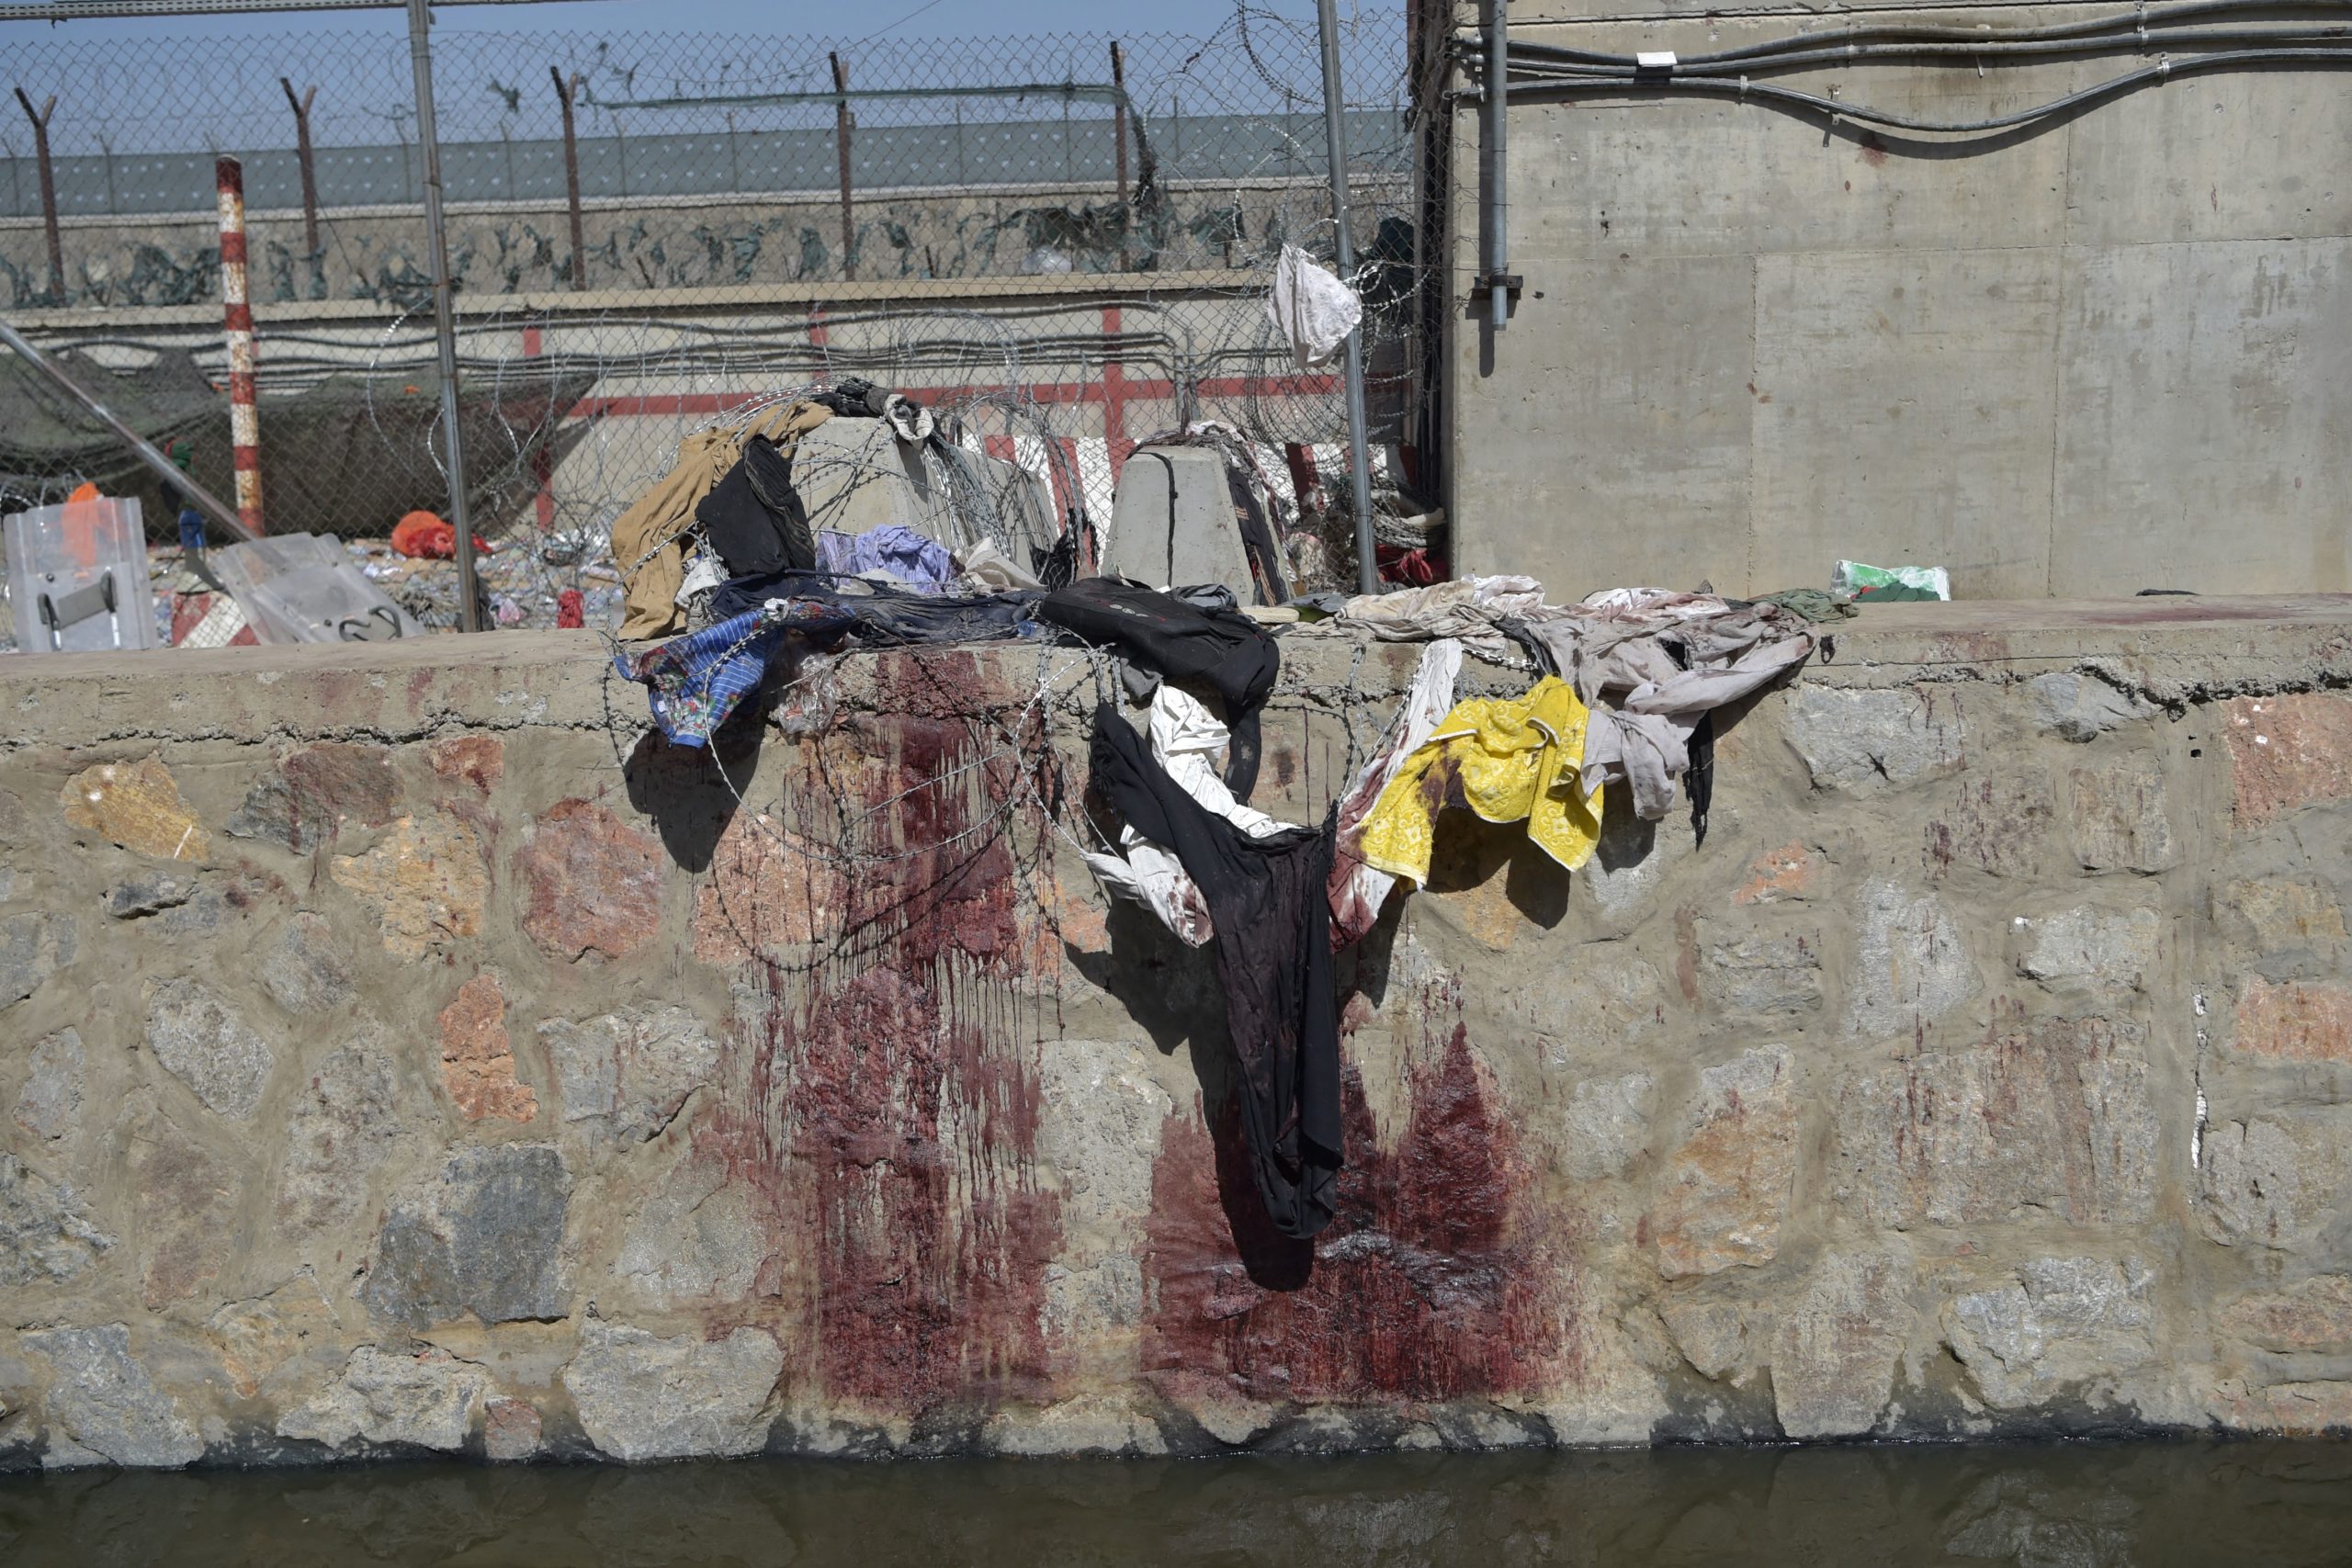 Clothes and blood stains of Afghan people who were waiting to be evacuated are seen at the site of the August 26 twin suicide bombs, which killed scores of people including 13 US troops, at Kabul airport on August 27, 2021. (Photo by WAKIL KOHSAR / AFP) (Photo by WAKIL KOHSAR/AFP via Getty Images)